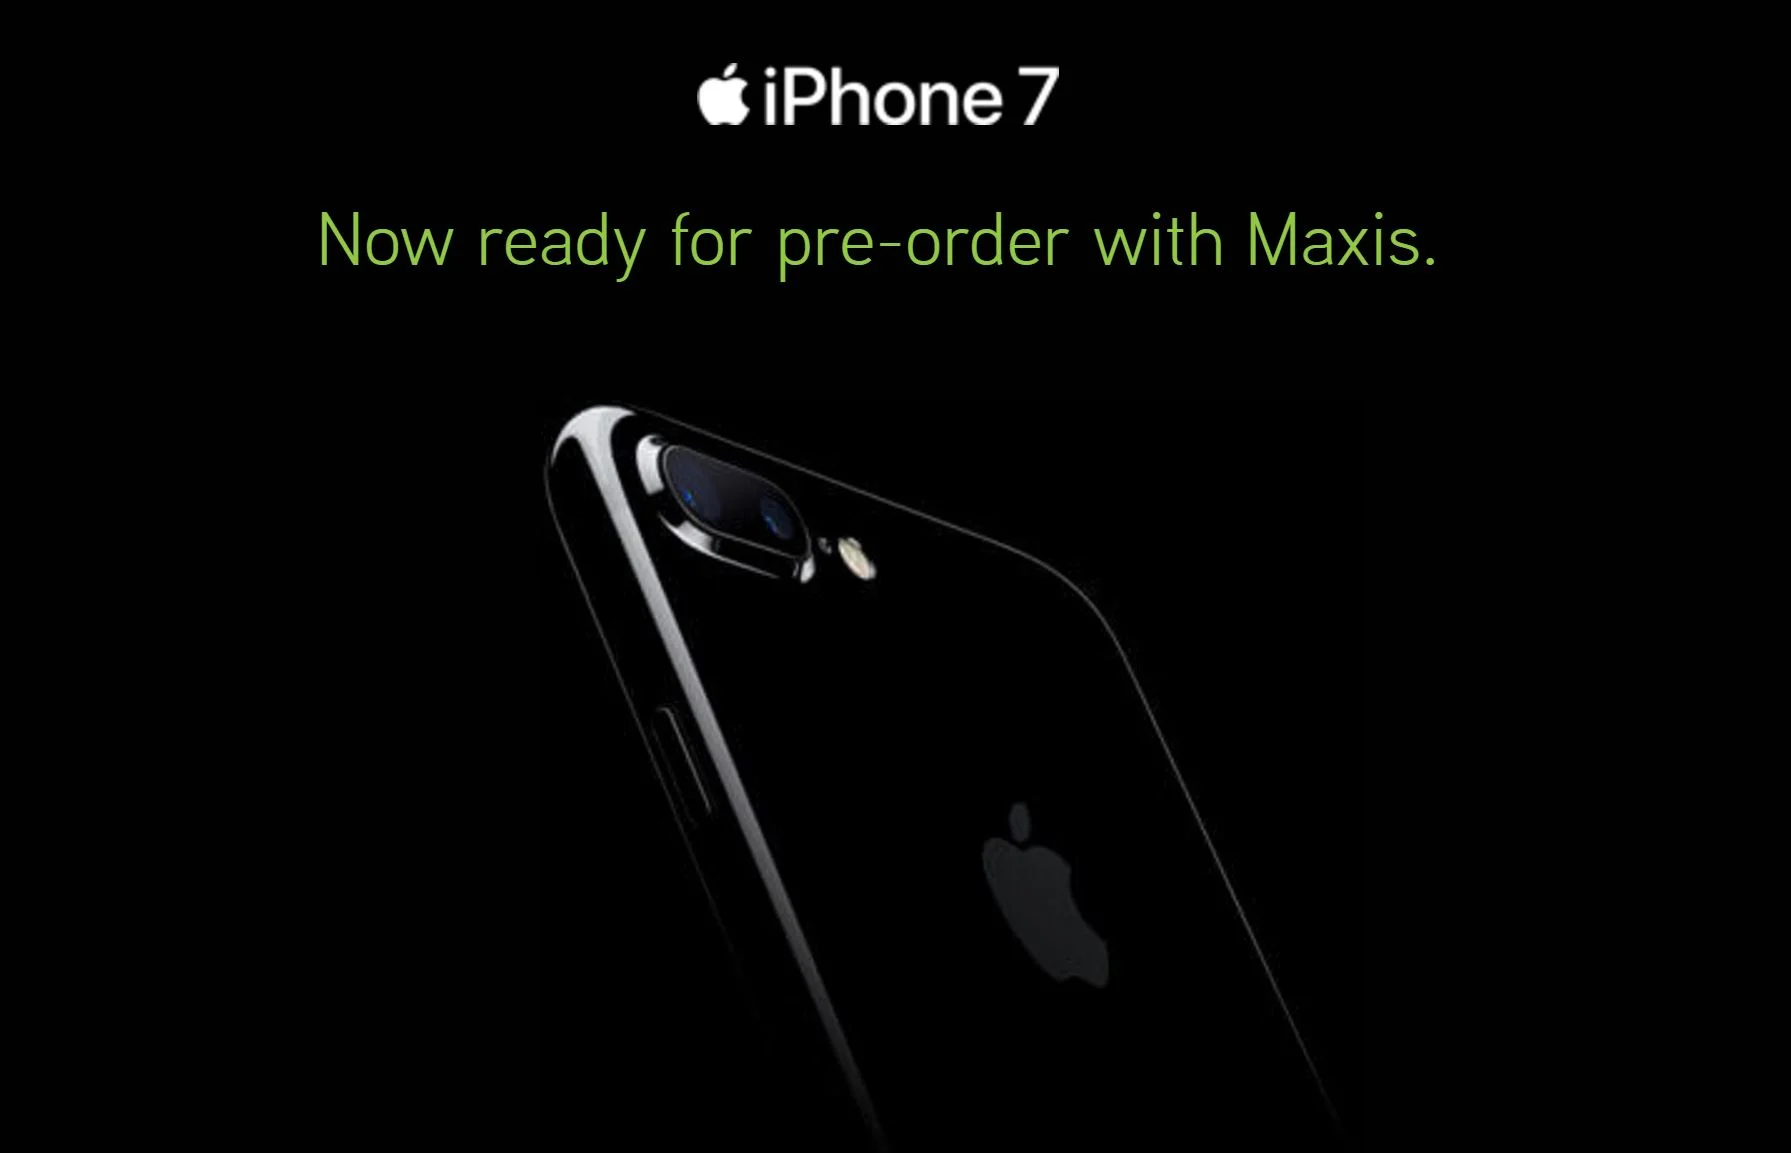 maxis iphone 7 pre order 1